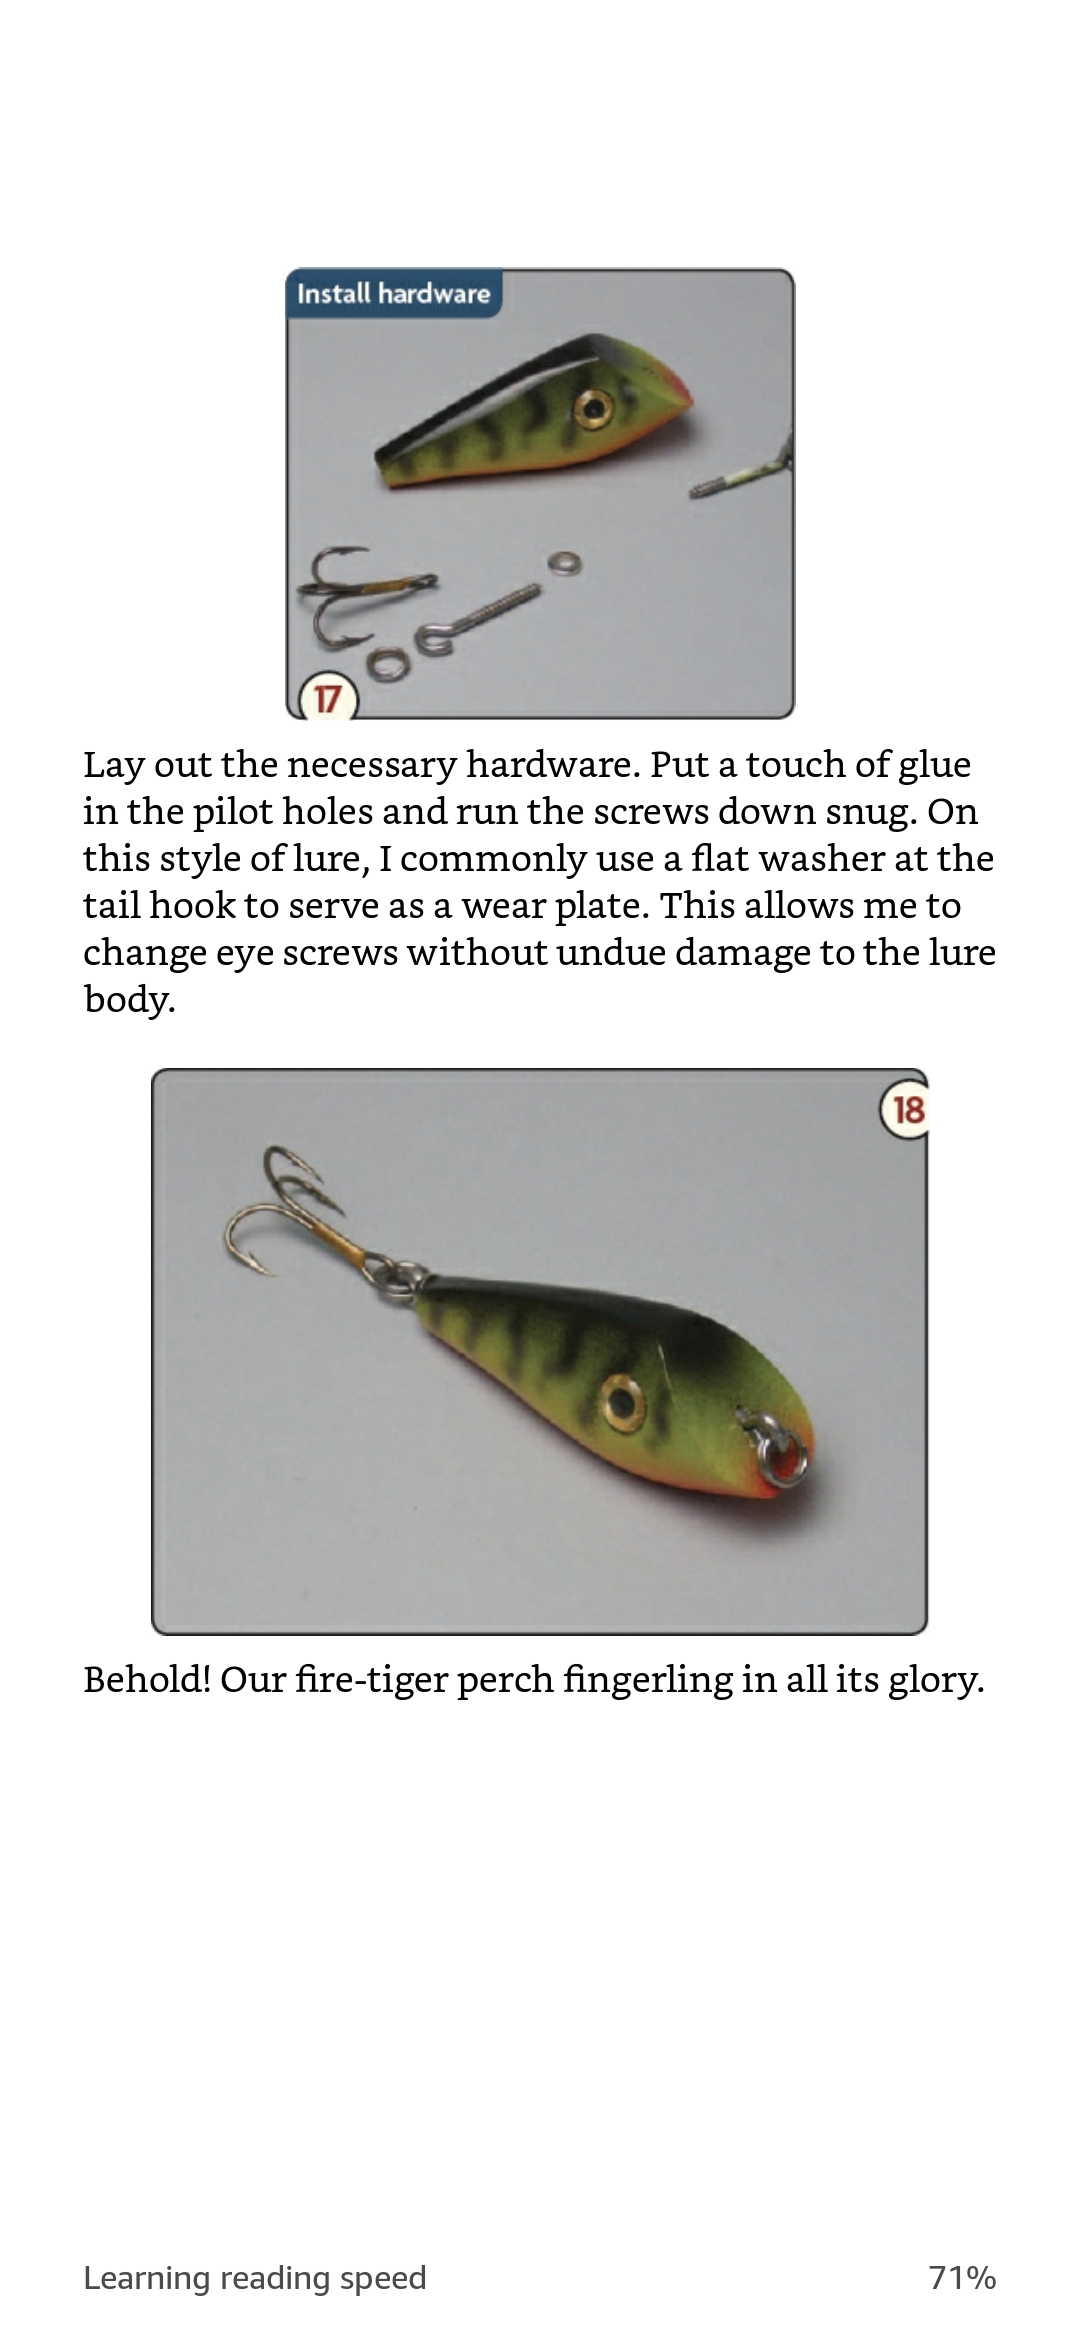 New to lure making what are these types of lures called? - Hard Baits -   - Tackle Building Forums